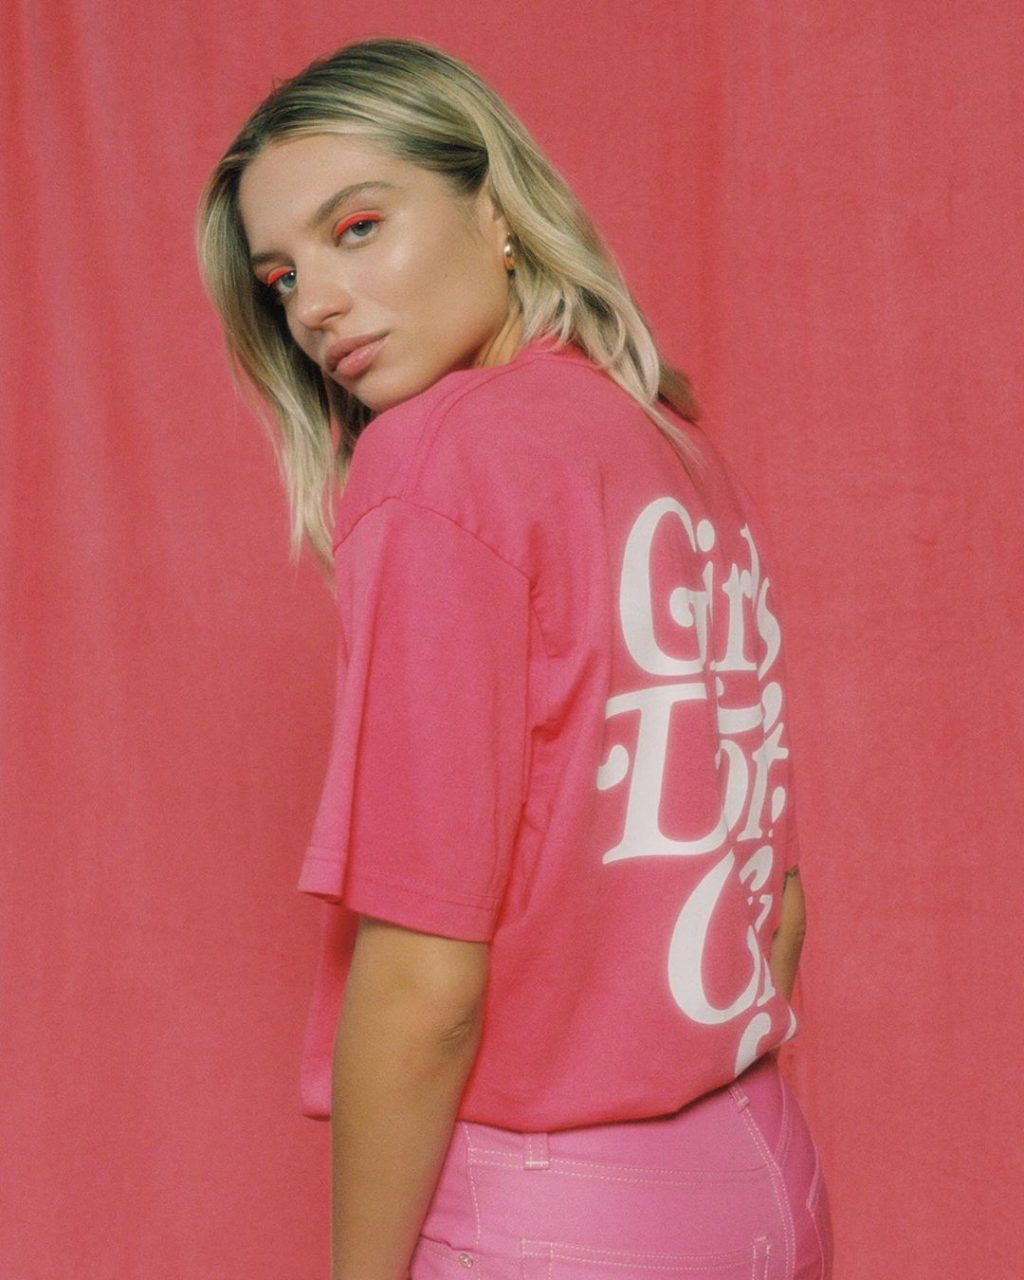 girls-dont-cry-2019-fall-collection-release-20190919